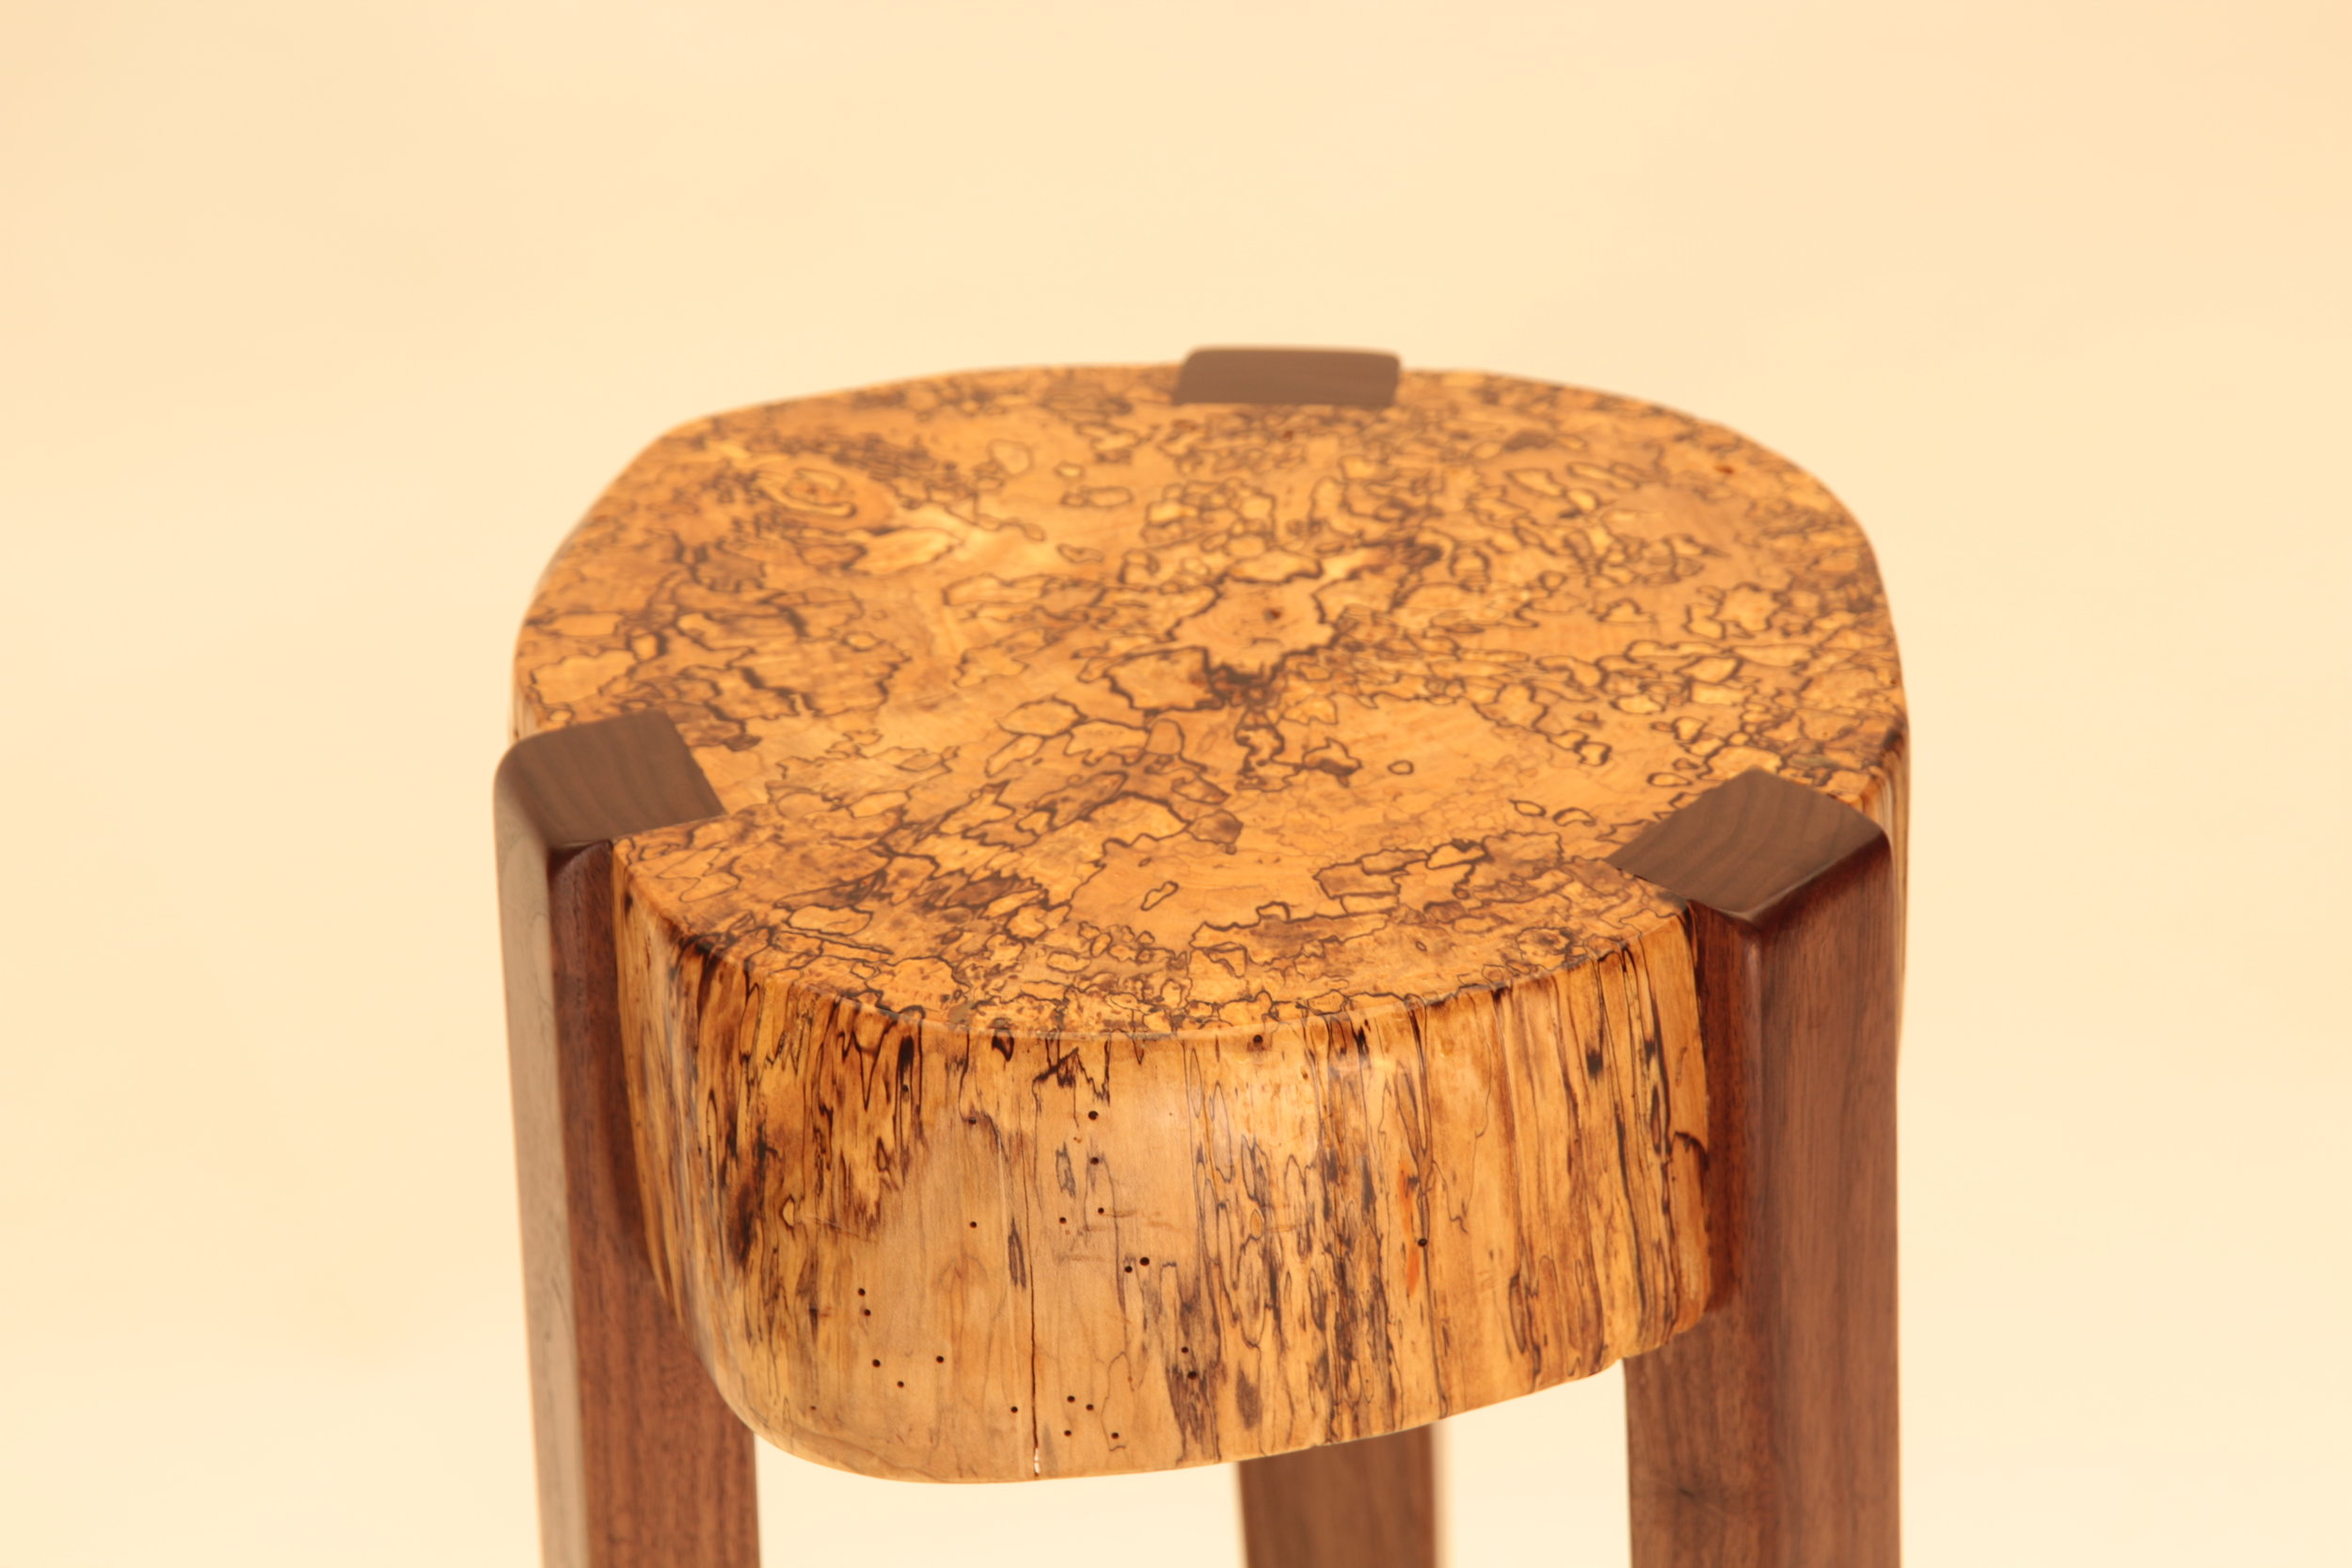 Tall Stump Table (detail view)